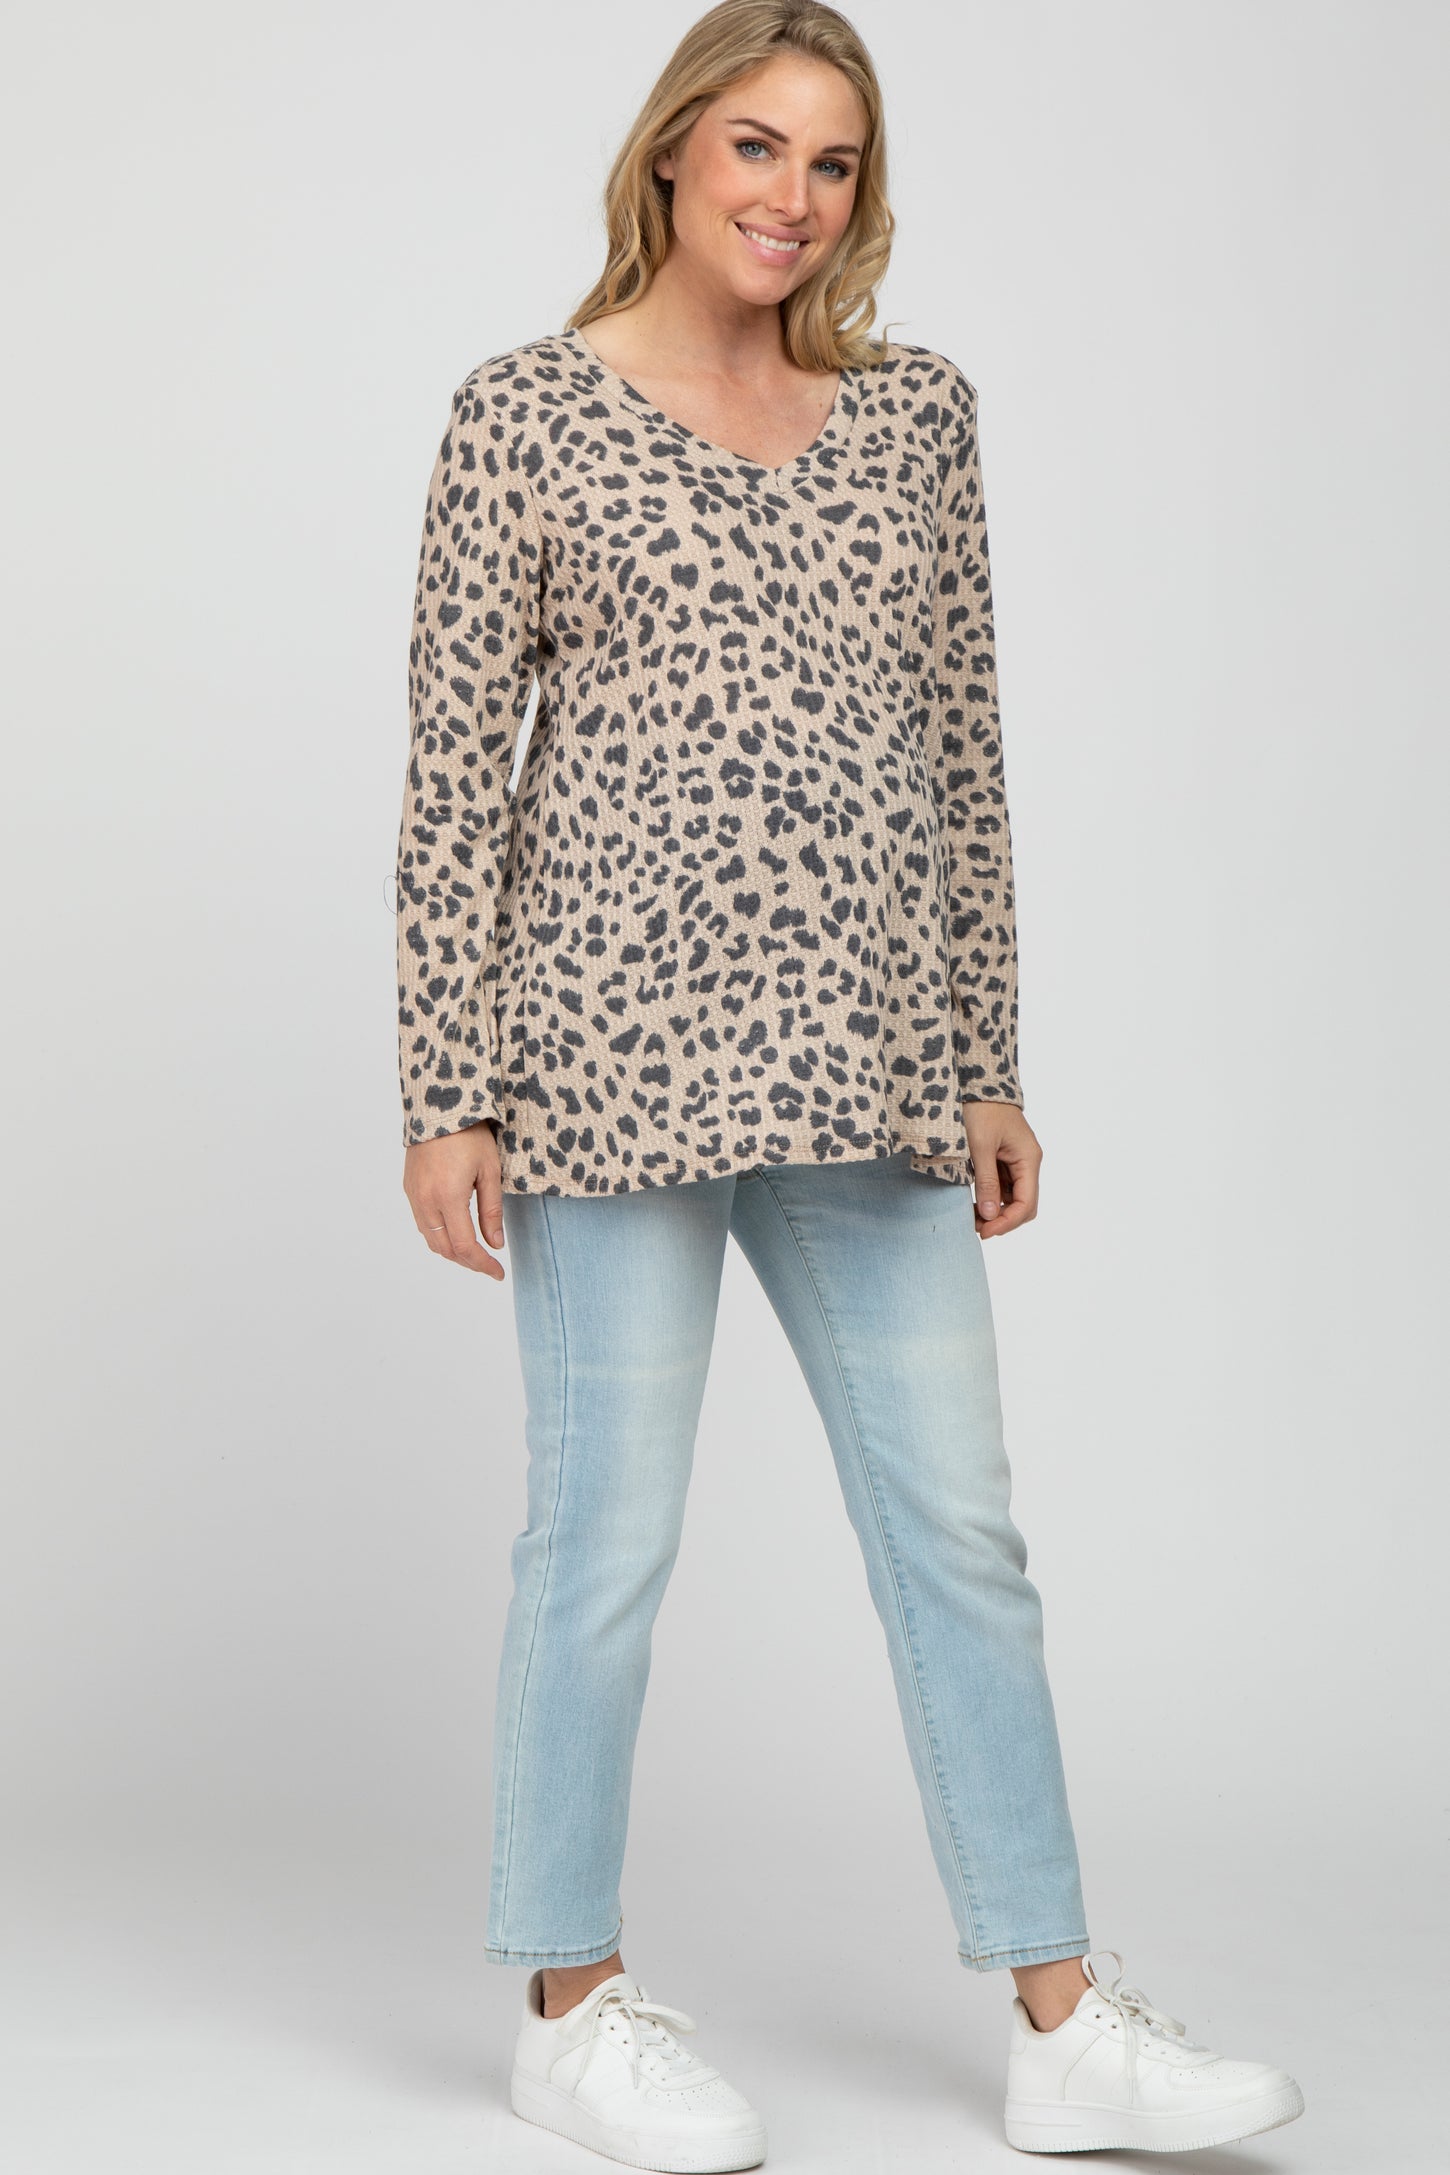 Taupe Leopard Print V-Neck Waffle Knit Maternity Top